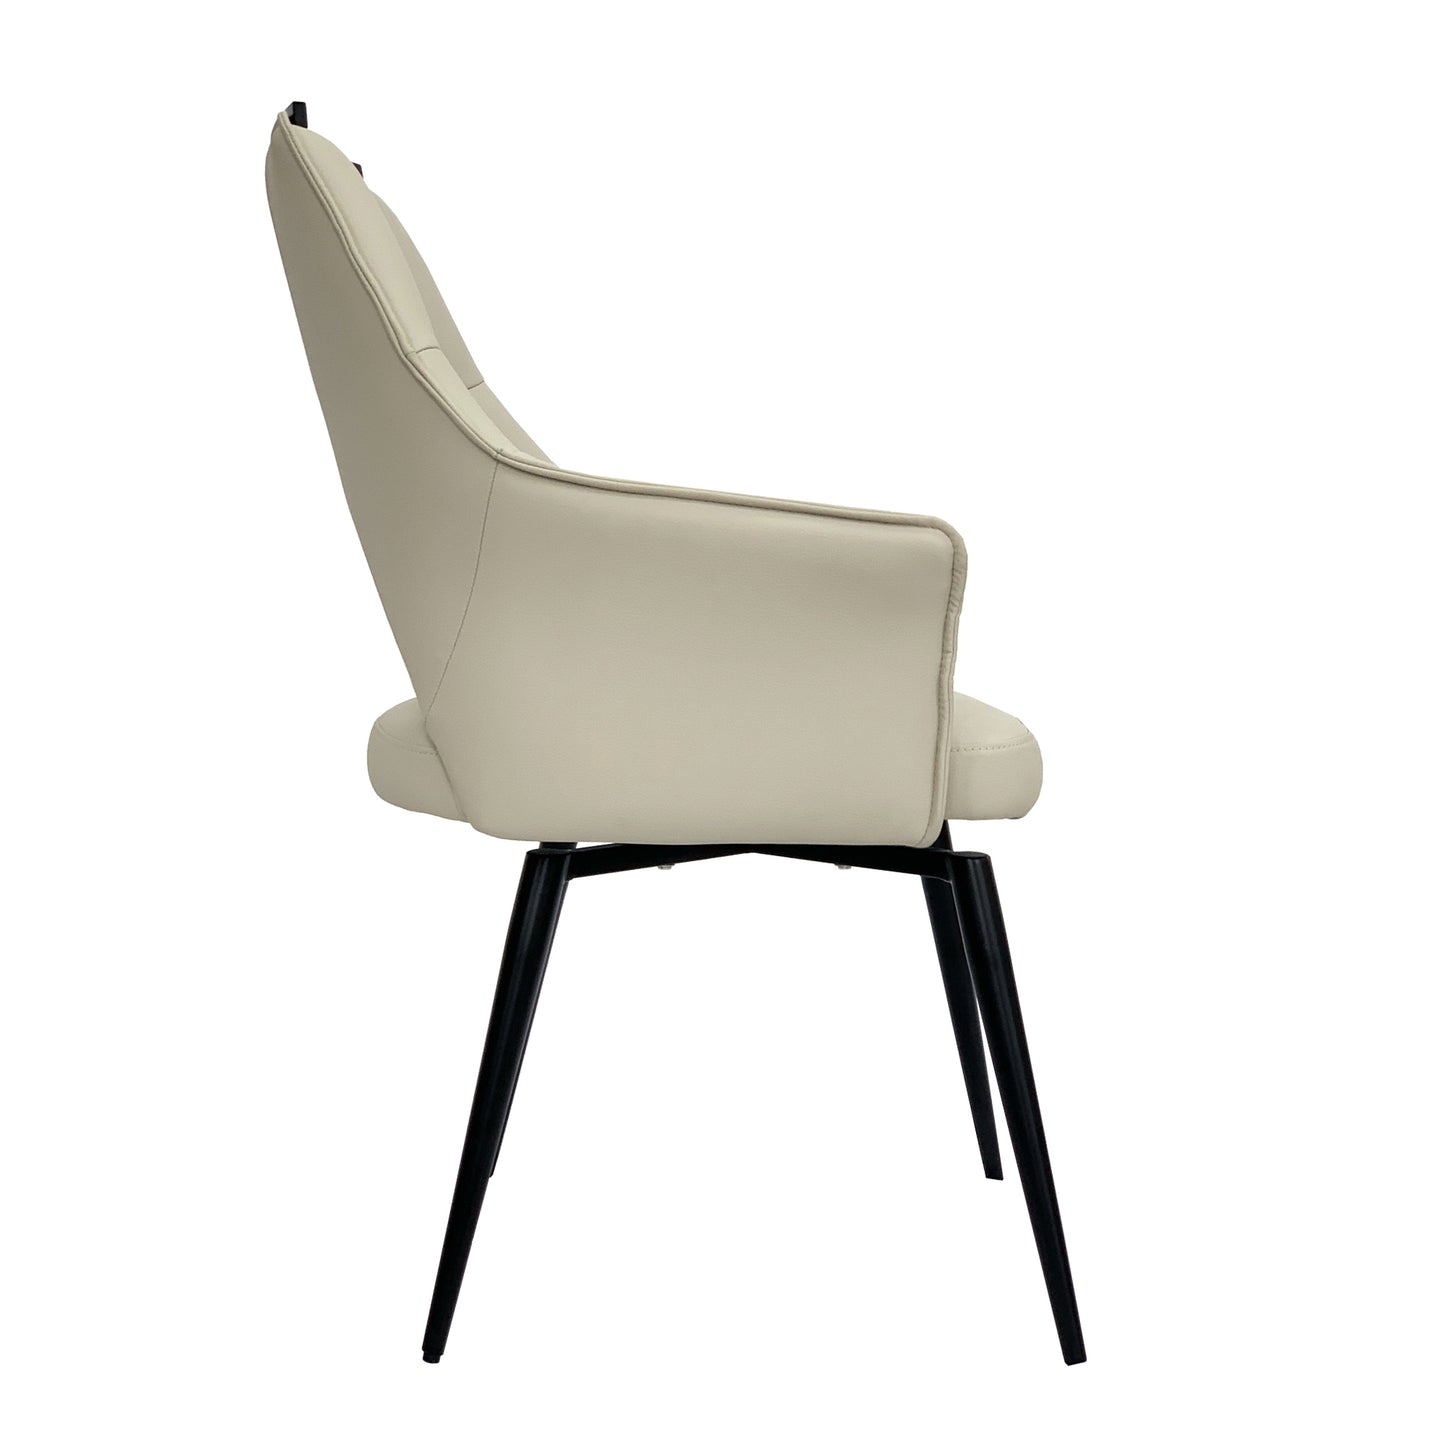 Beige Leather Dining Chair With Swivel